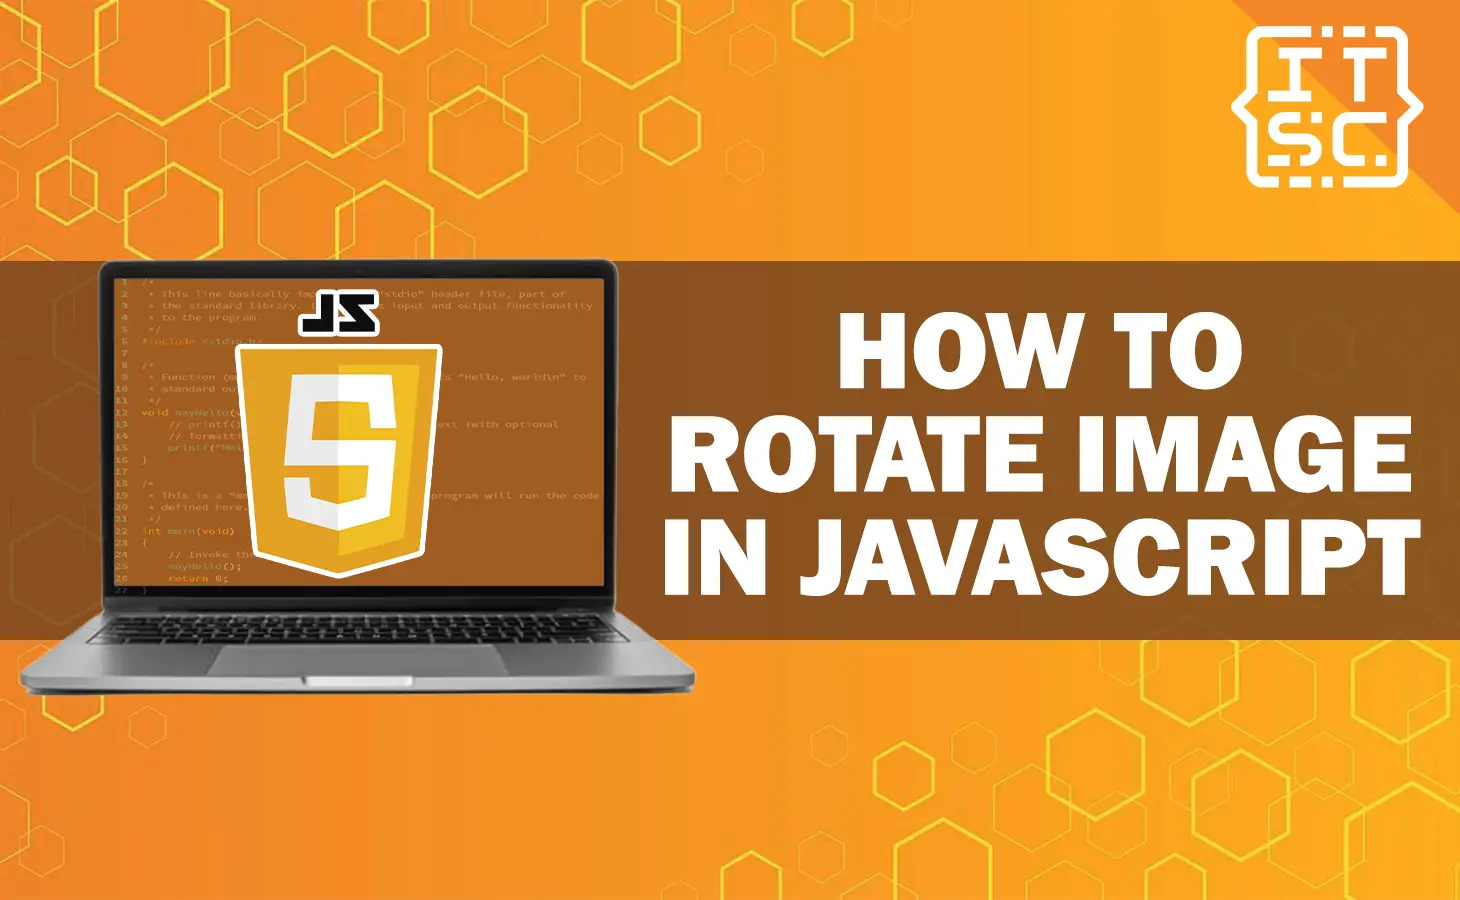 How to rotate image in JavaScript